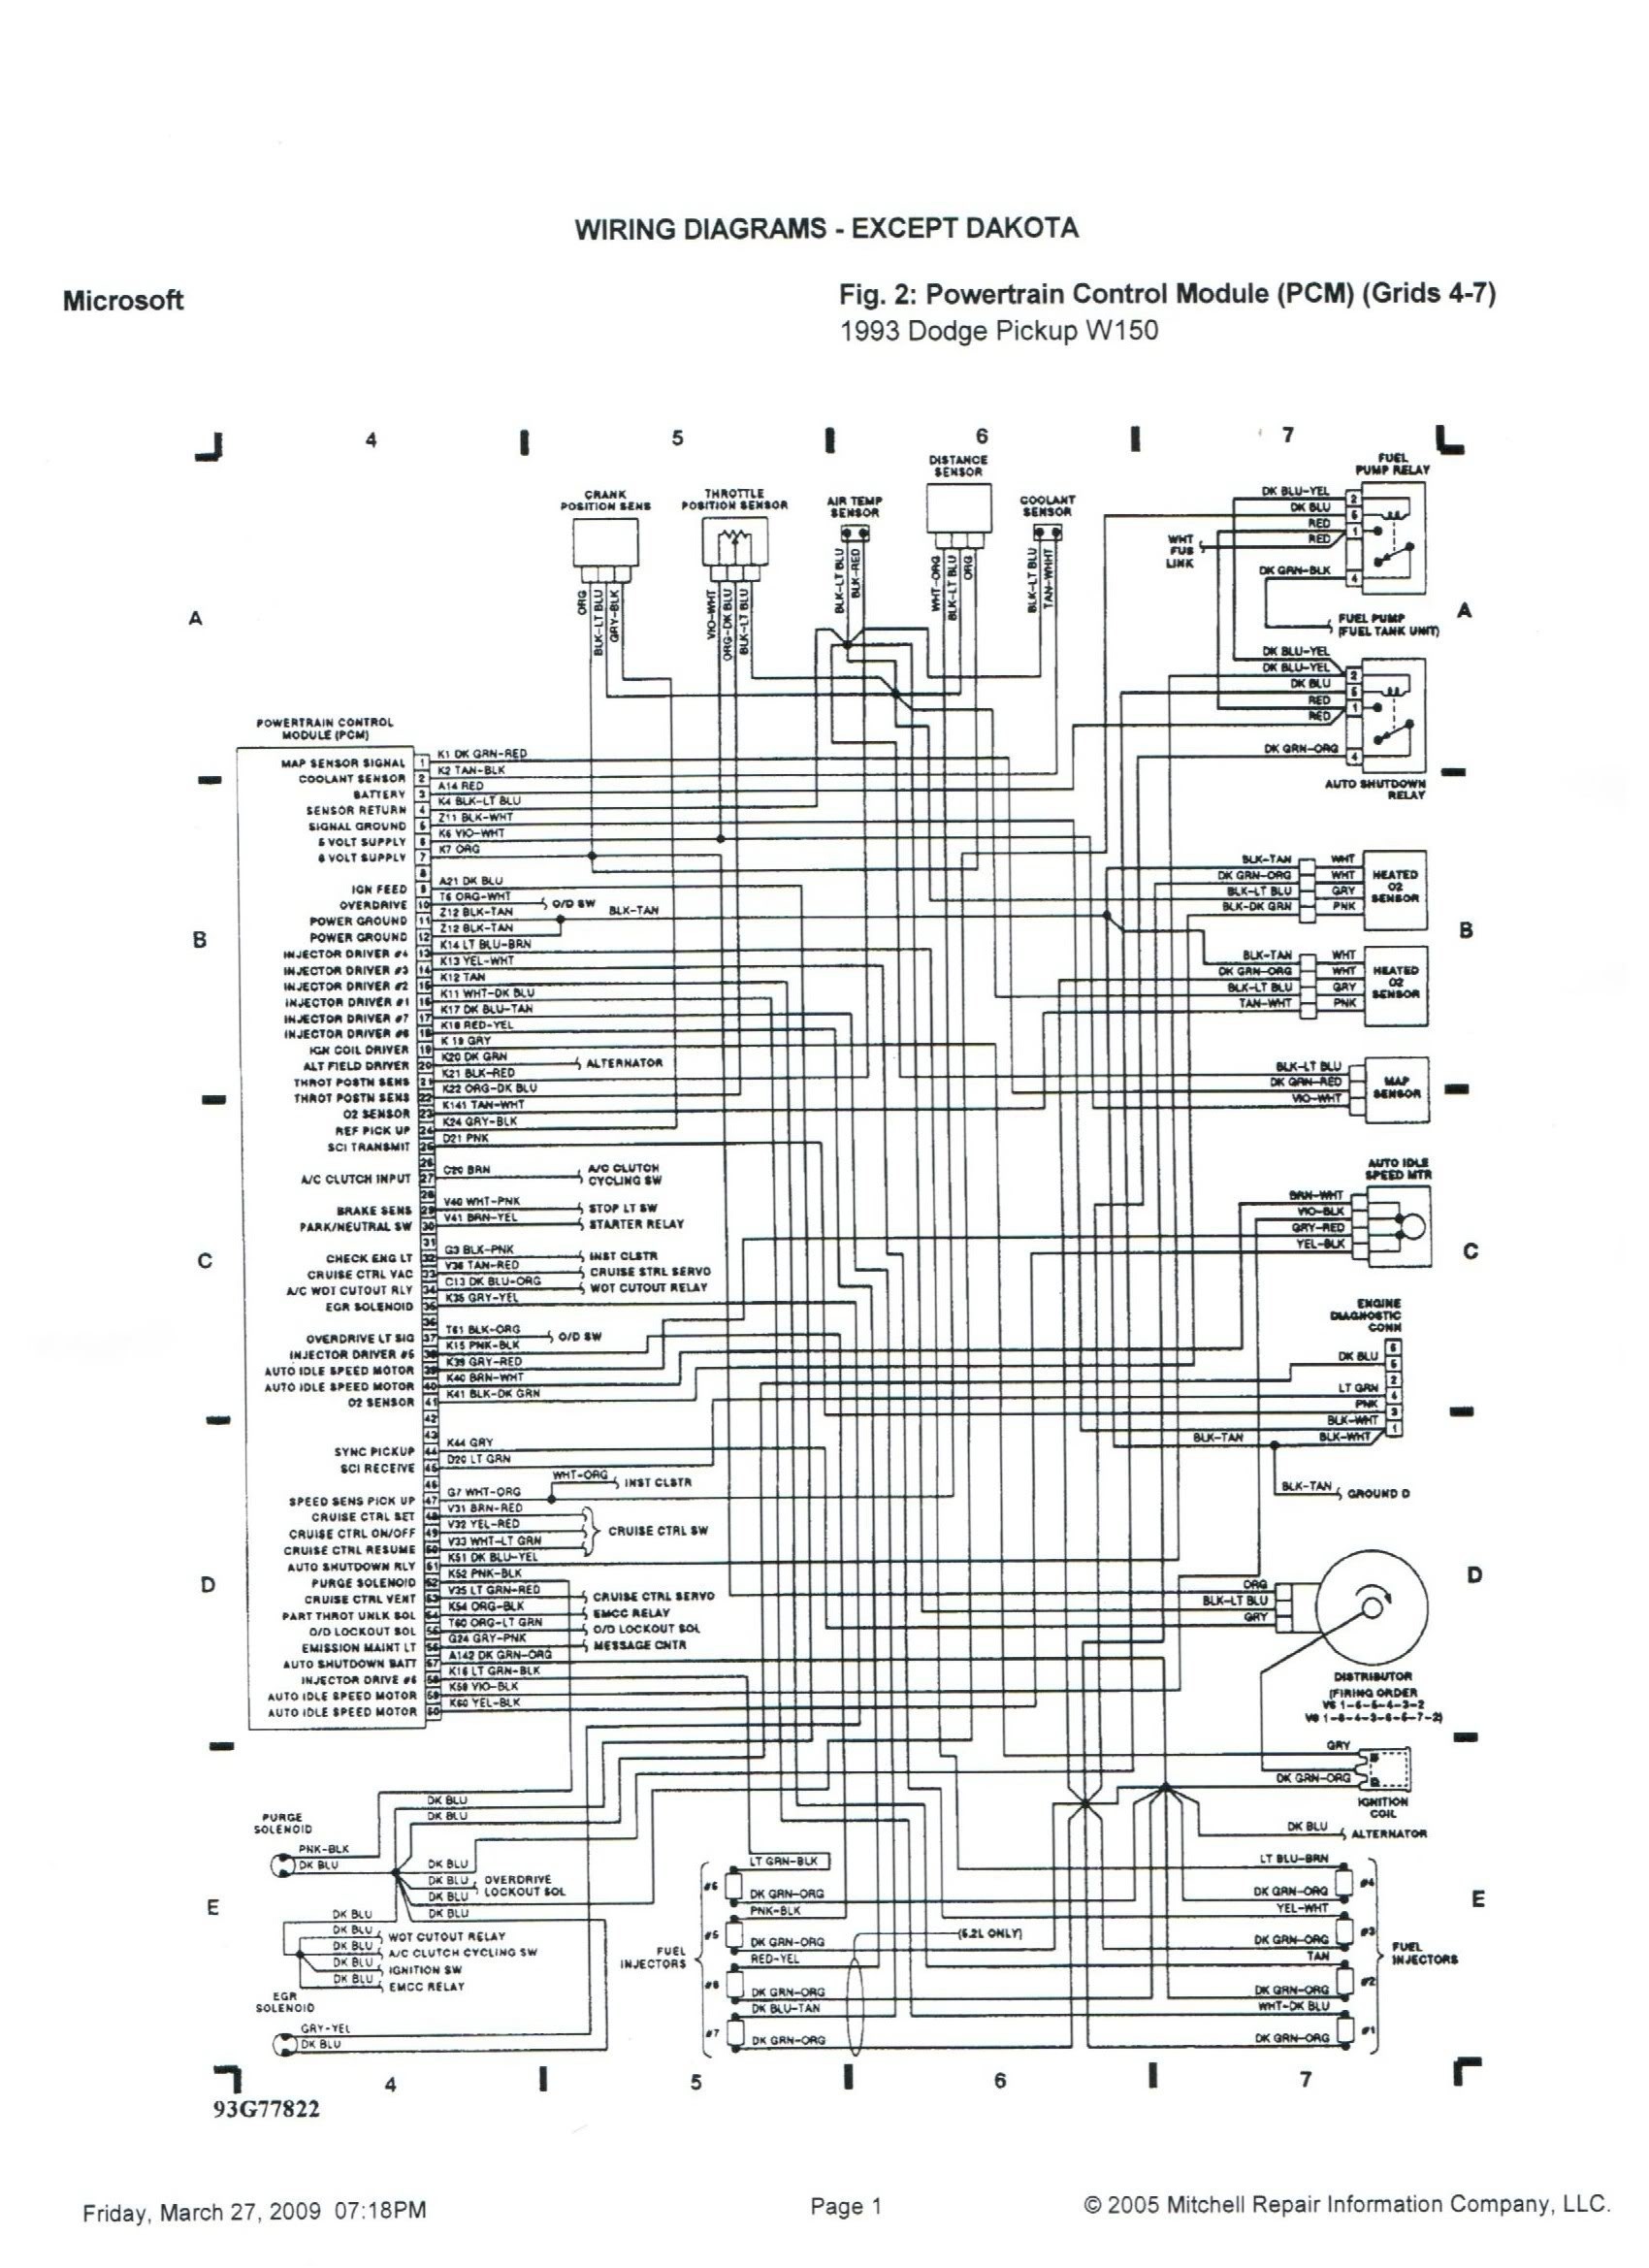 1995 Dodge Ram 1500 Transmission Wiring Diagram New Stereo Wiring Diagrams V8 Engine I Need the